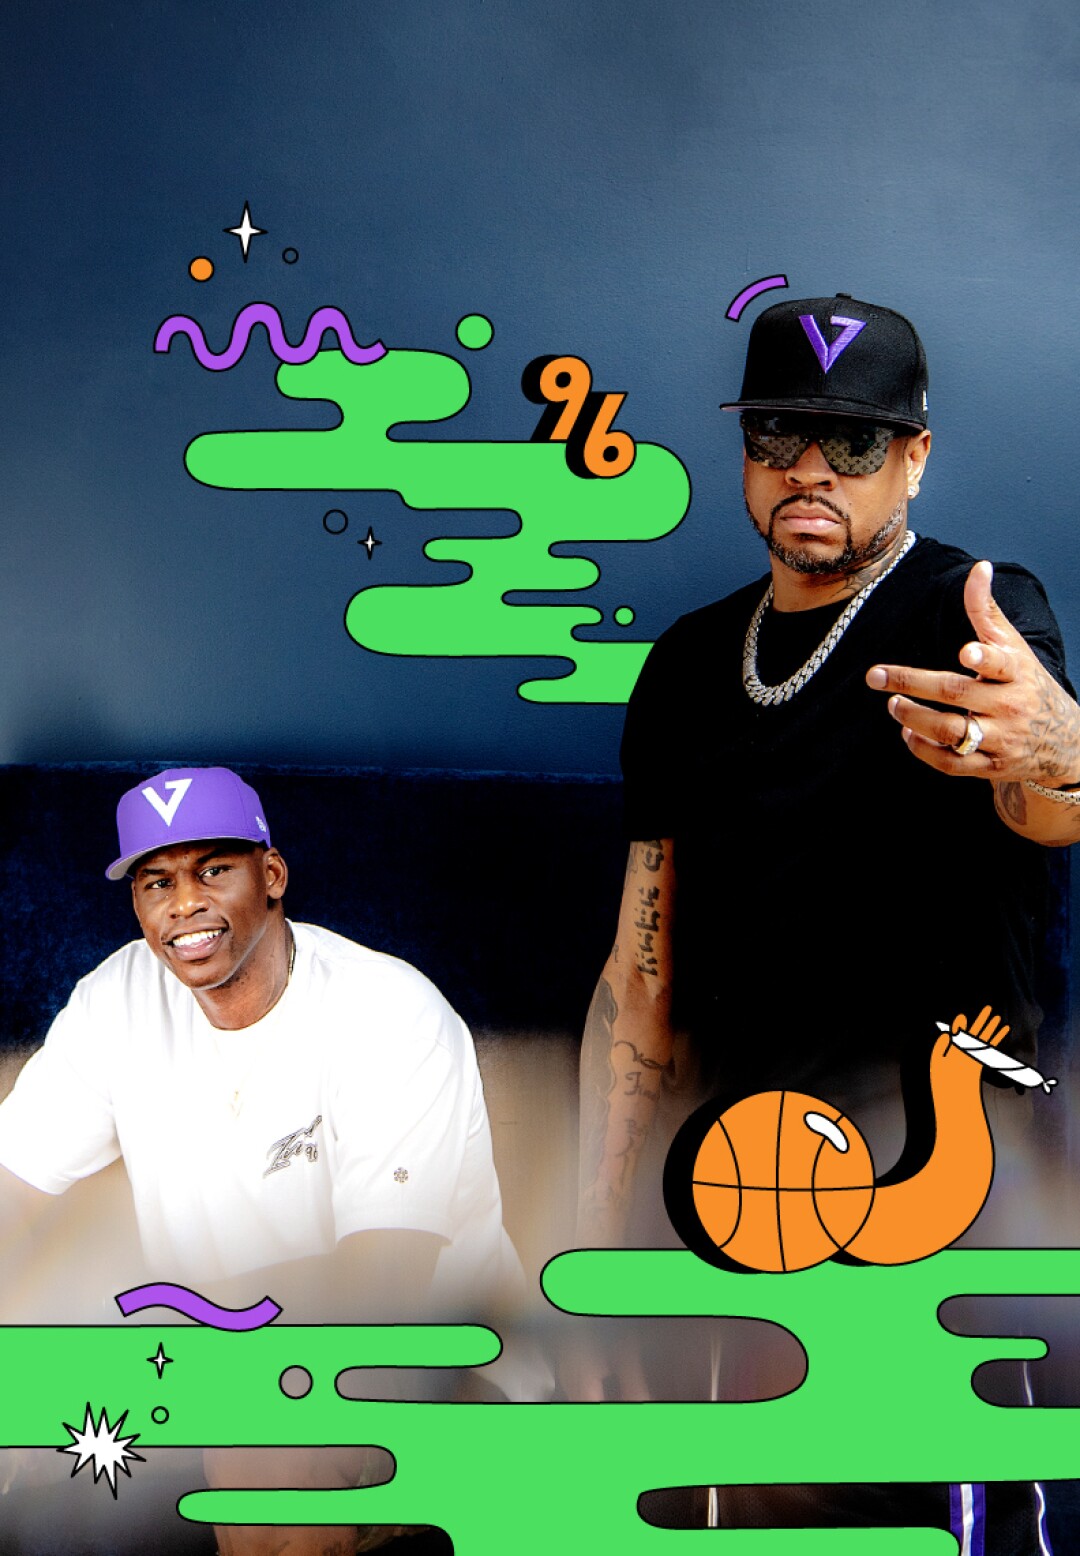 Al Harrington and Allen Iverson next to each other with illustrations around them